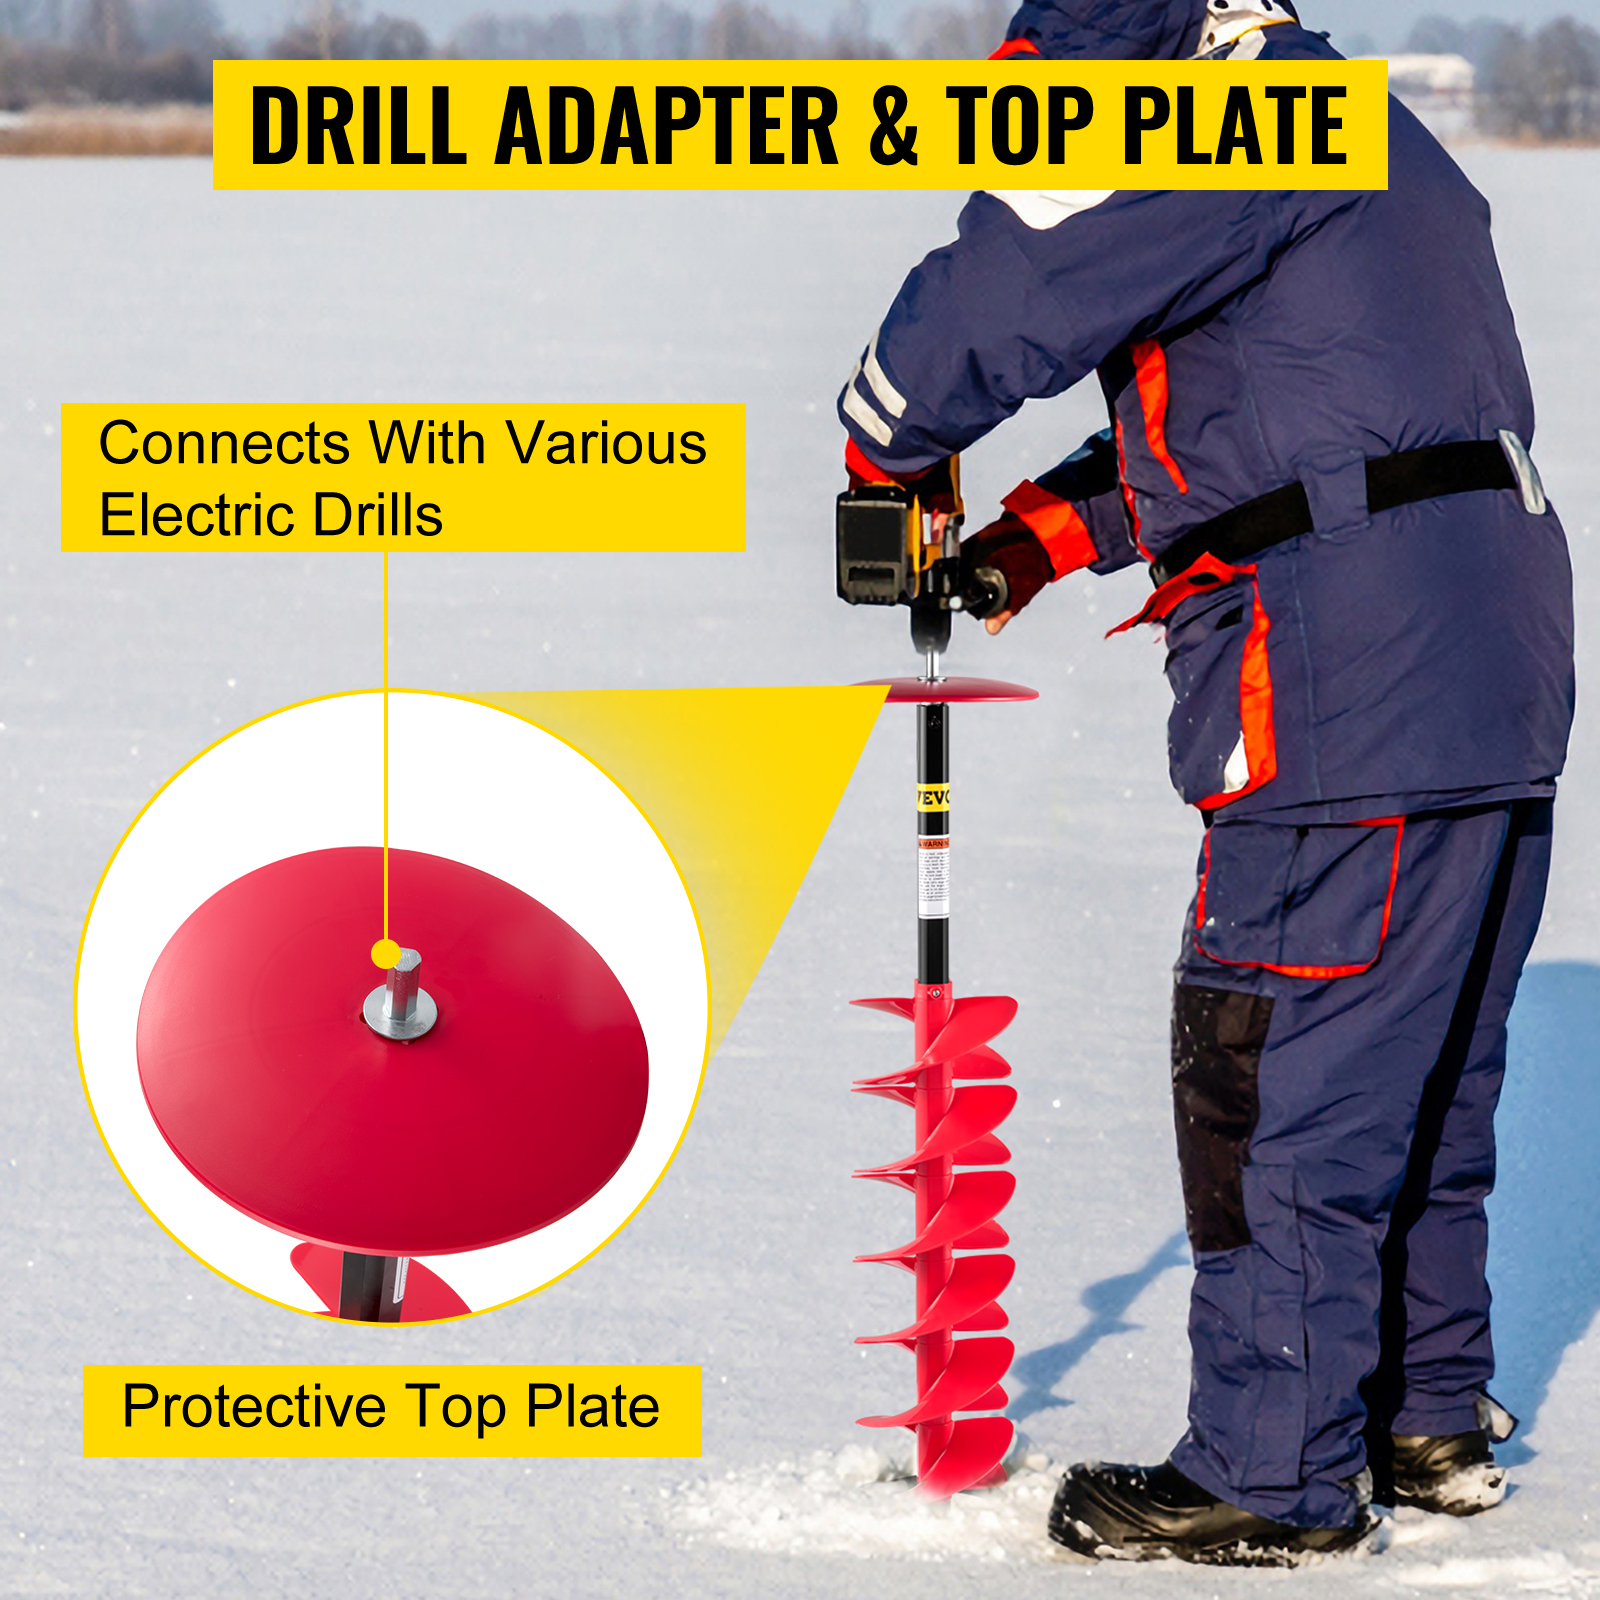 VEVOR Ice Drill Auger, 8'' Diameter Nylon Ice Auger, 41'' Length Ice Auger  Bit, Auger Drill w/ 14'' Adjustable Extension Rod, Rubber Handle, Drill